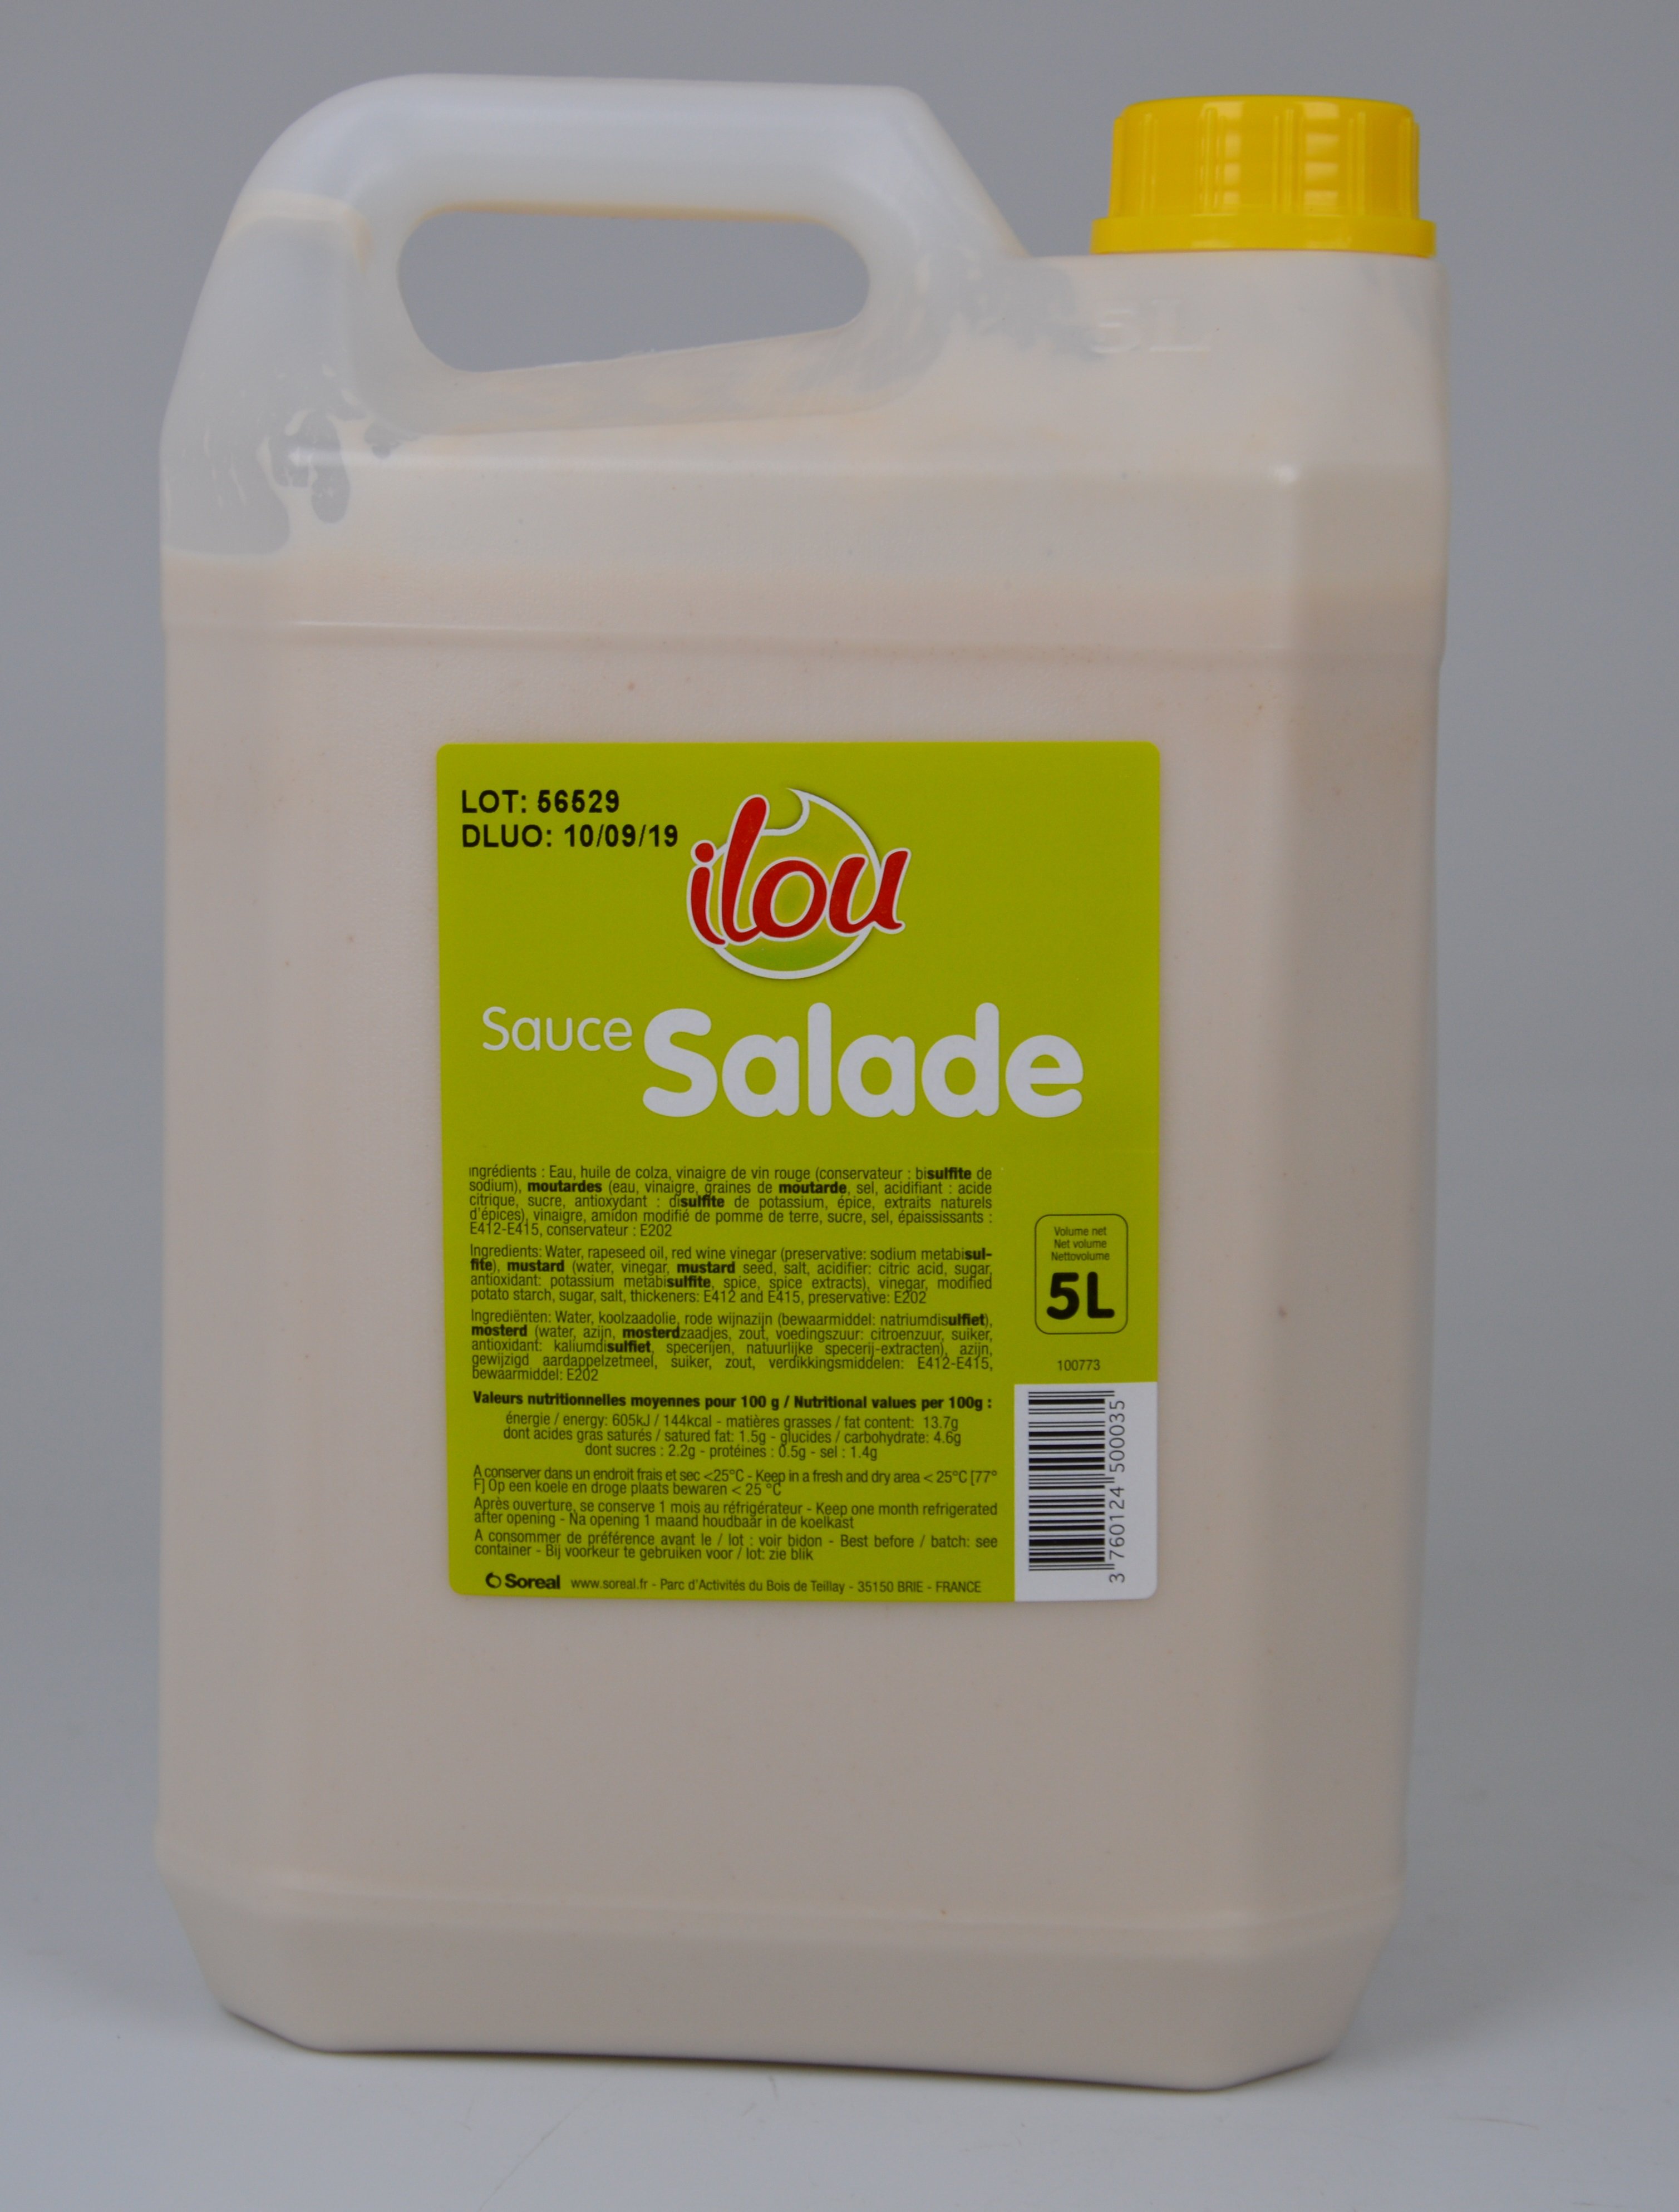 https://www.goodepices.com/image/4741-1-l/Good+%C3%A9pices+Sauce+Salade+5+Litres-1.jpg